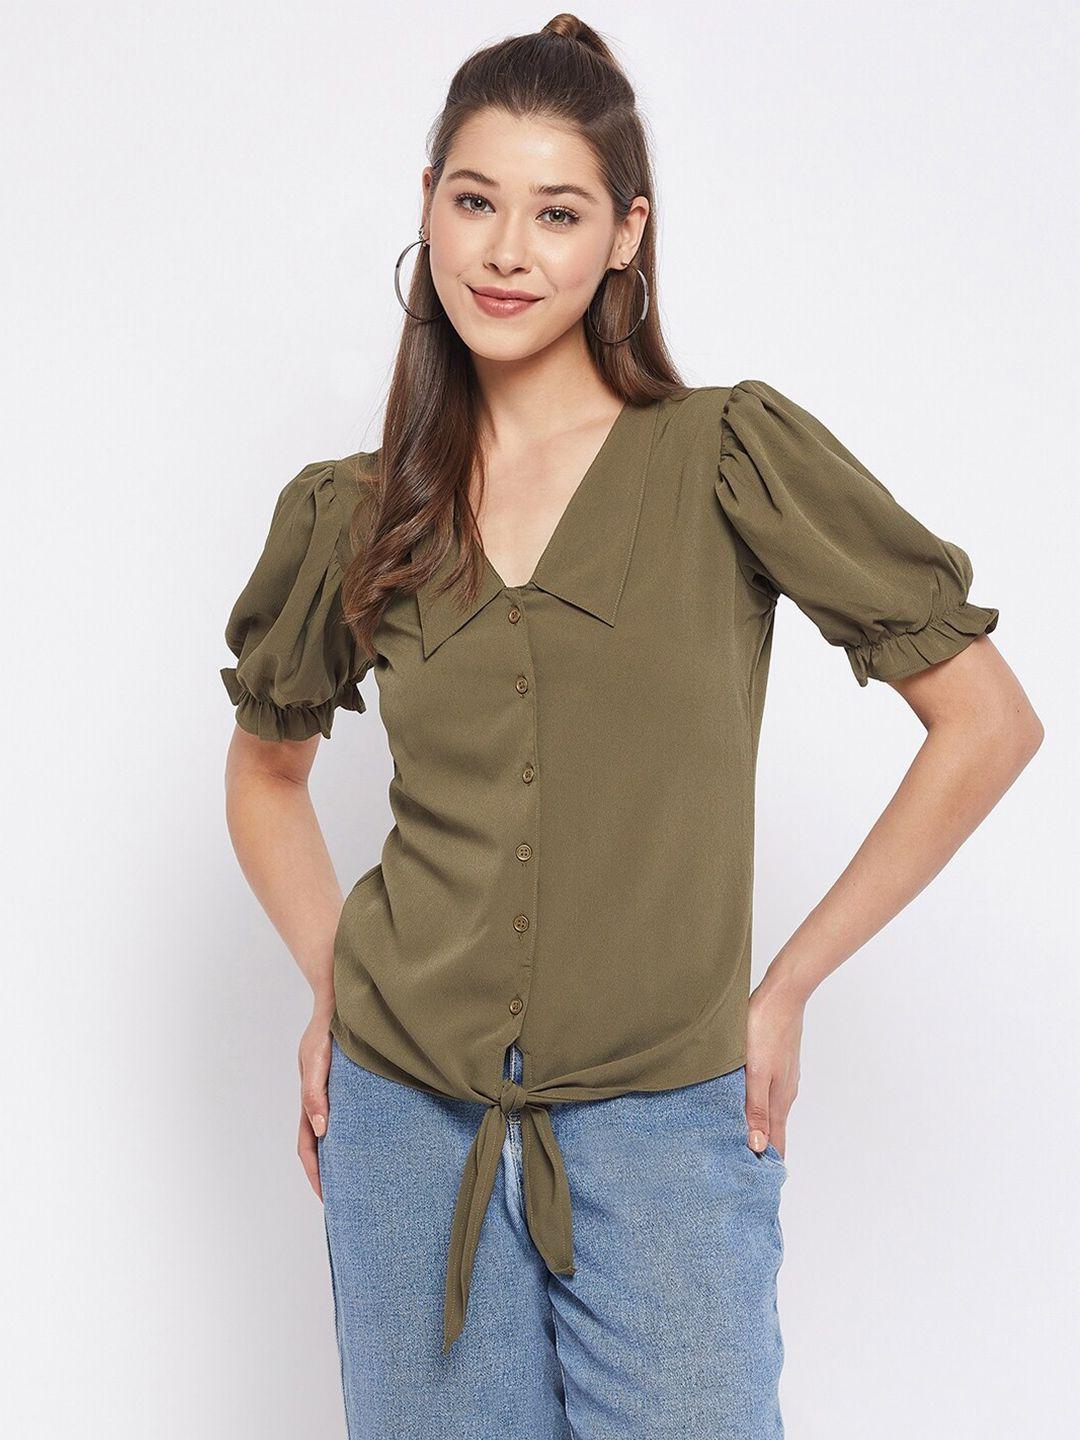 winered olive green crepe solid shirt style top